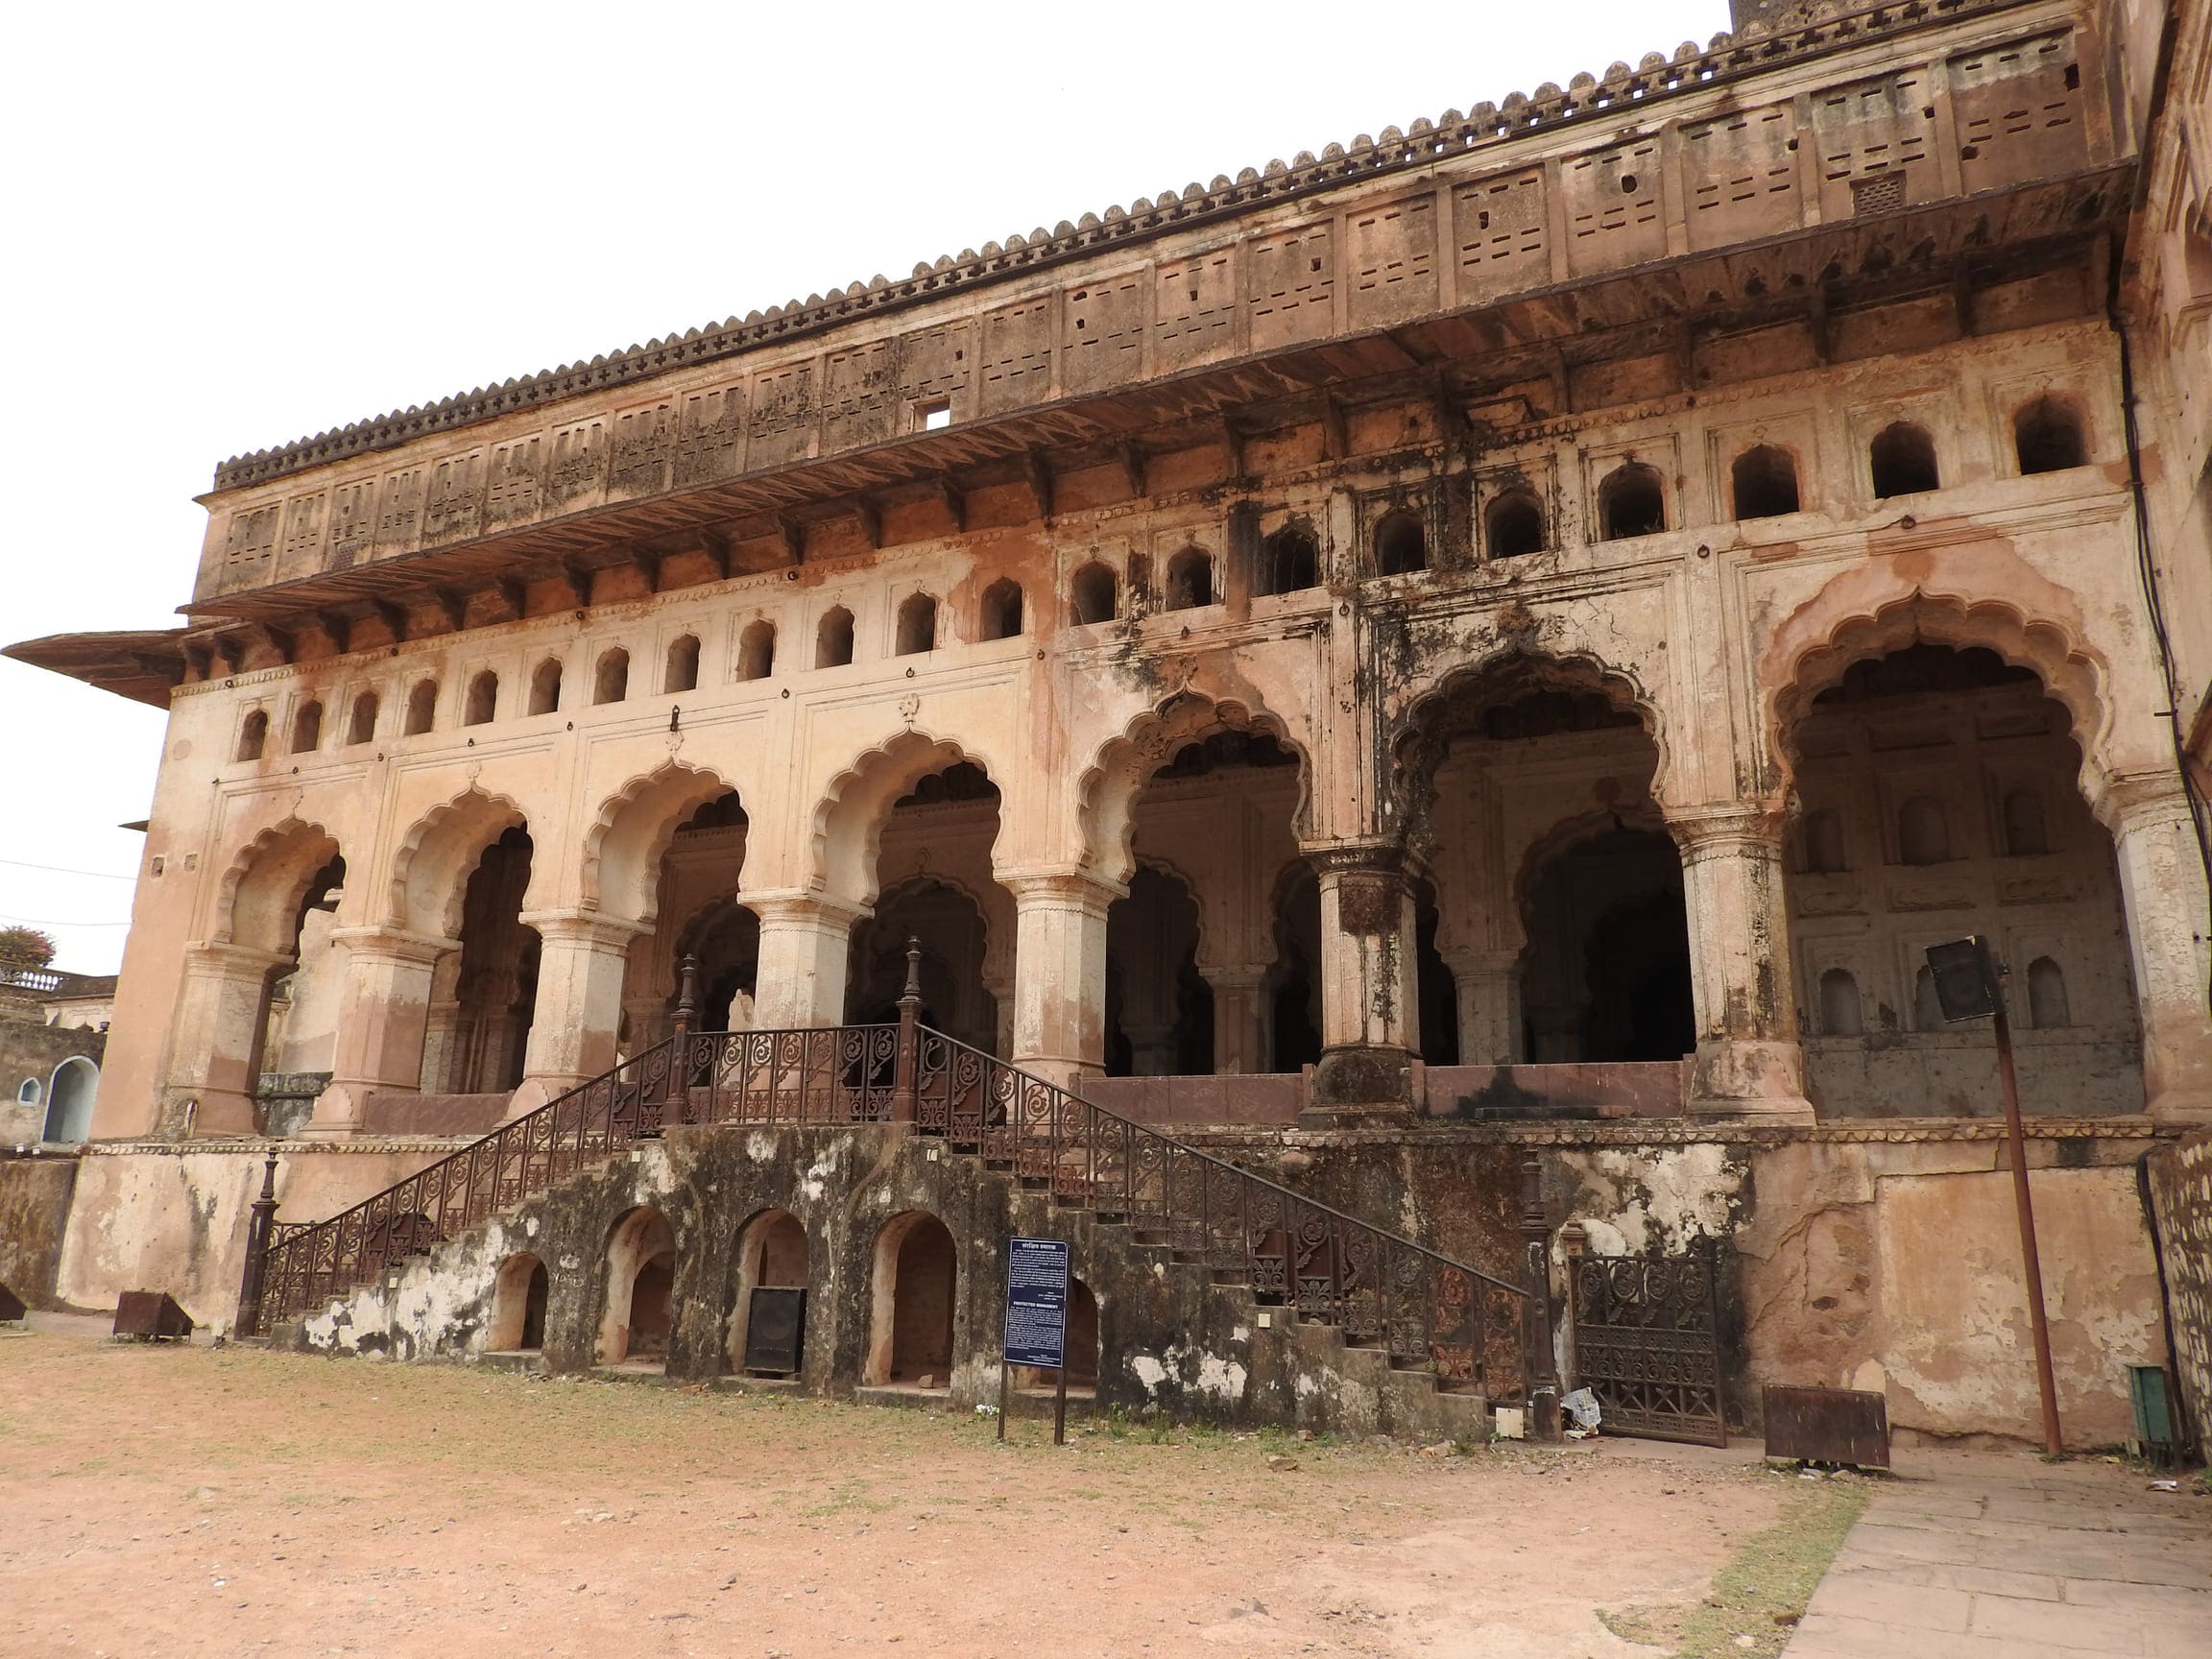 The exterior view of Raj Mahal, an imposing Bundela palace situated in Orchha, built for the reception of Mughal emperor Jahangir 